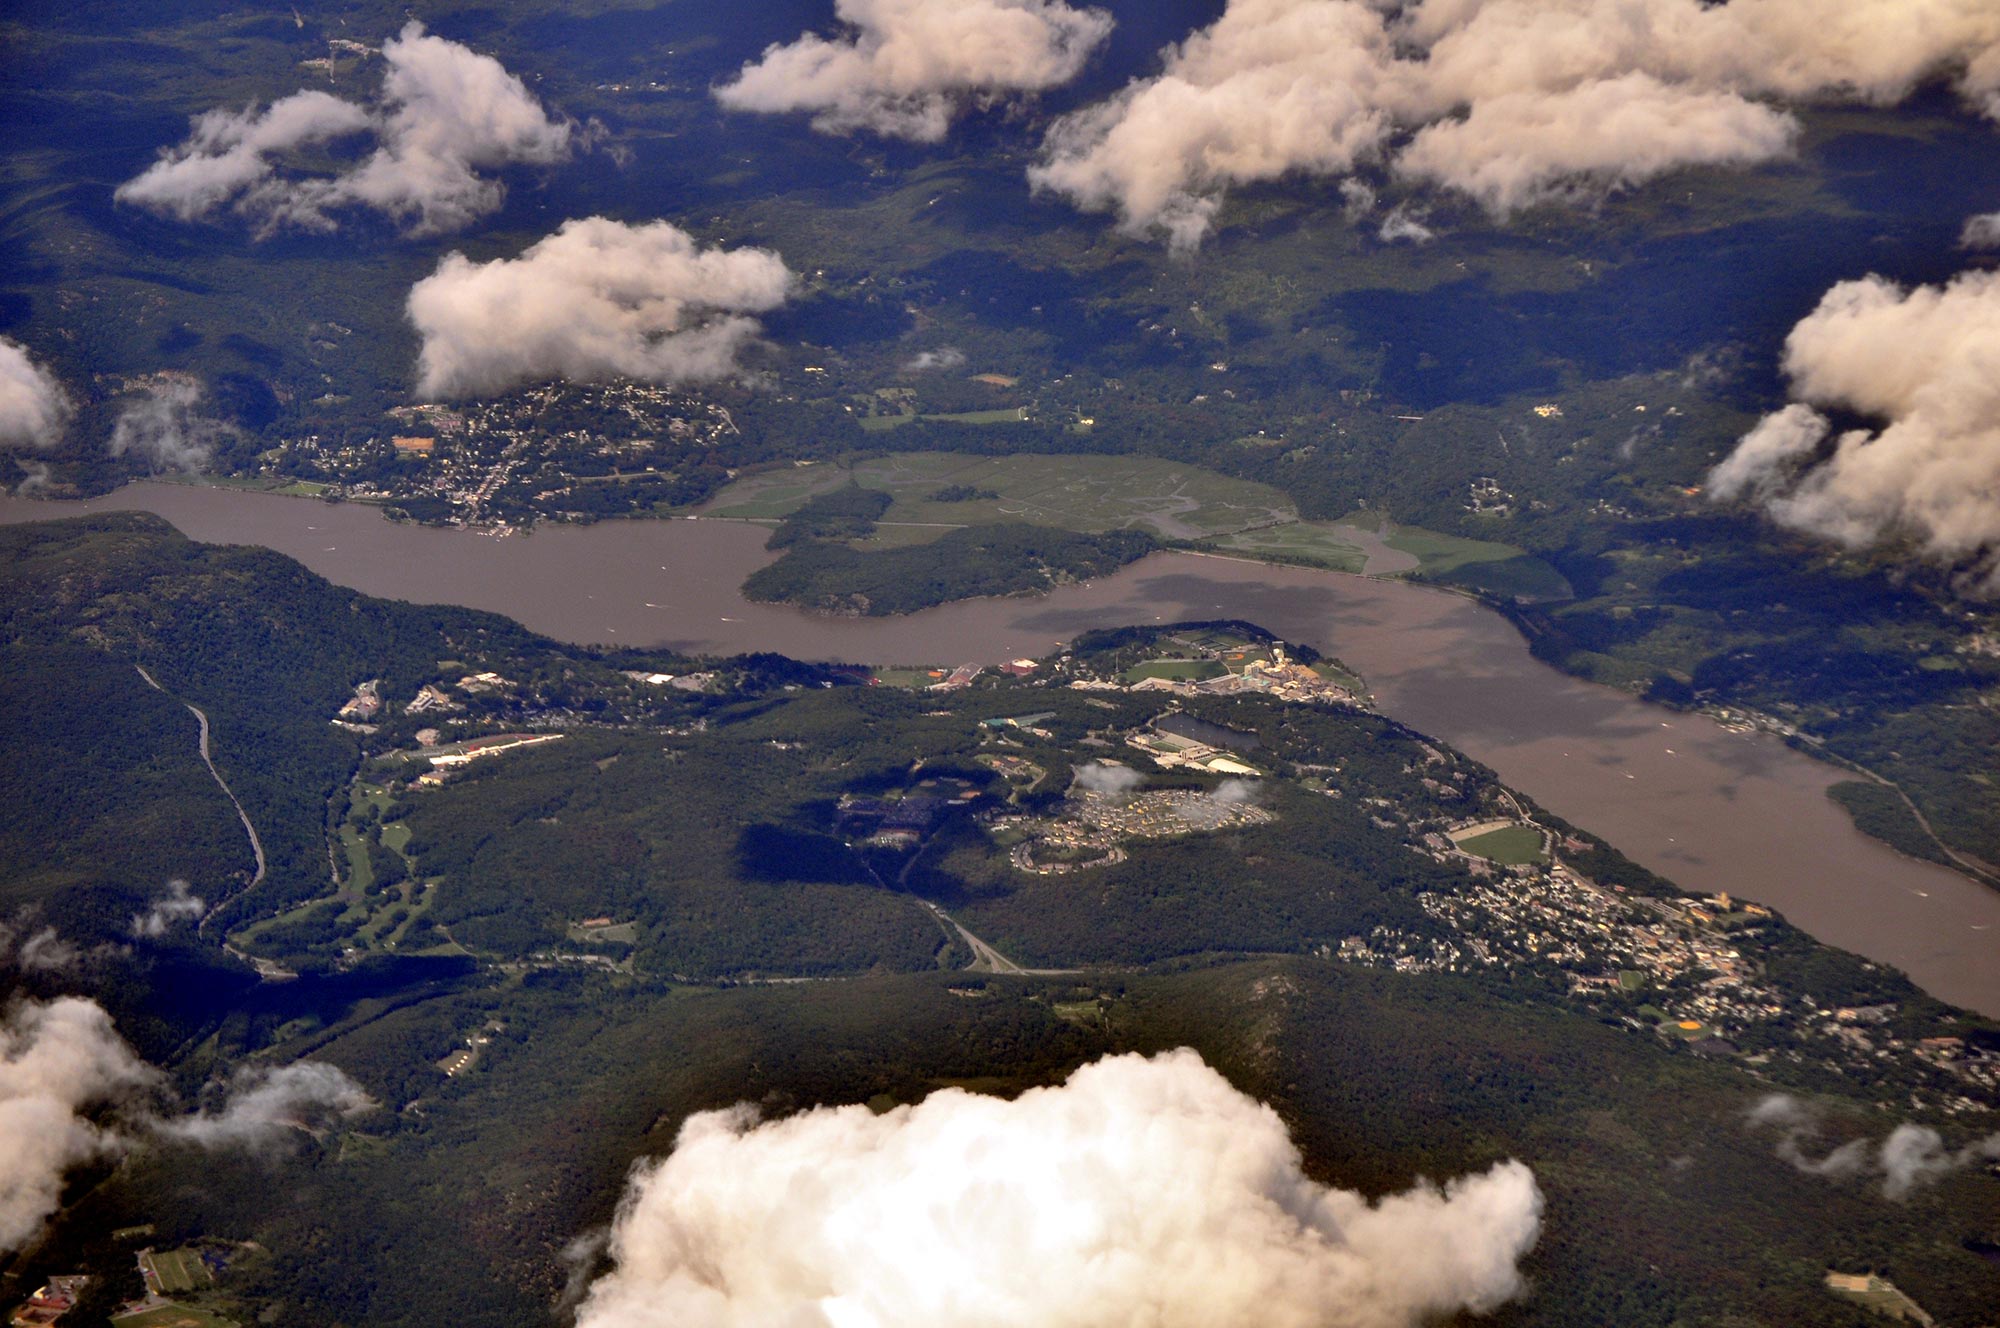 Aerial view of the Hudson River in West Point, a town located in the tidal freshwater portion of the river.